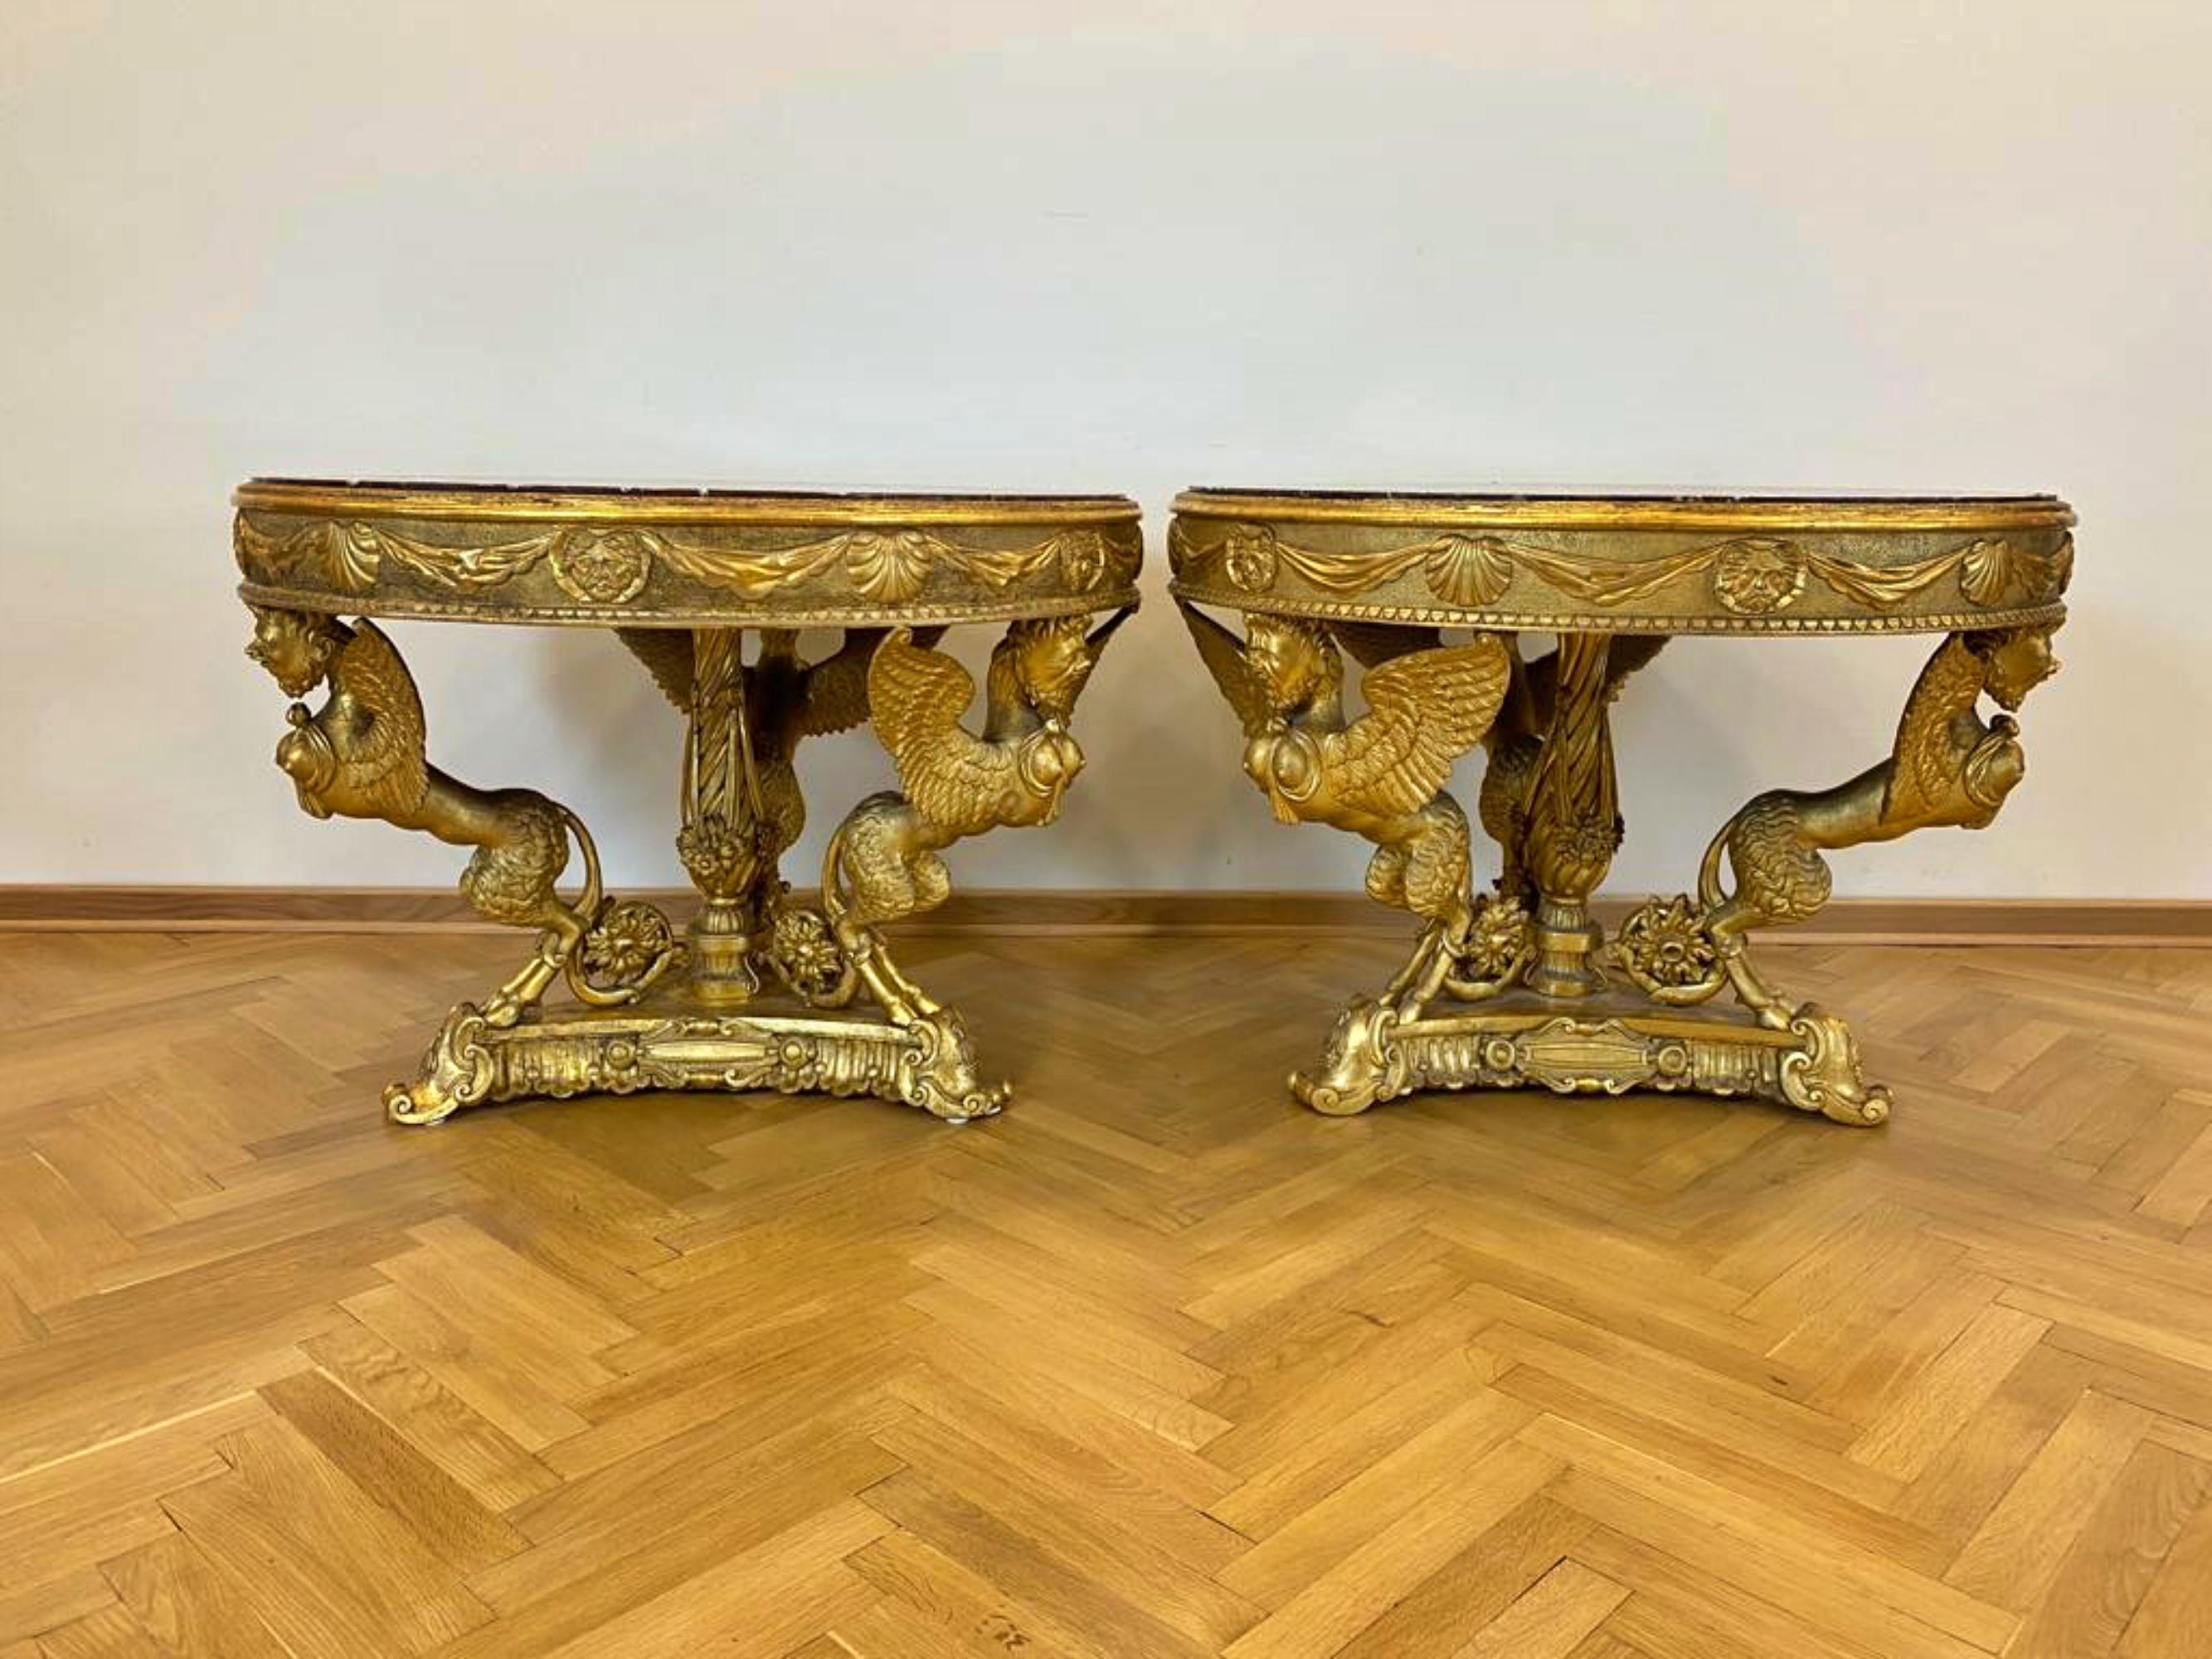 Impressive Pair of Tables First Empire Napoleon III Early 19th Century For Sale 4